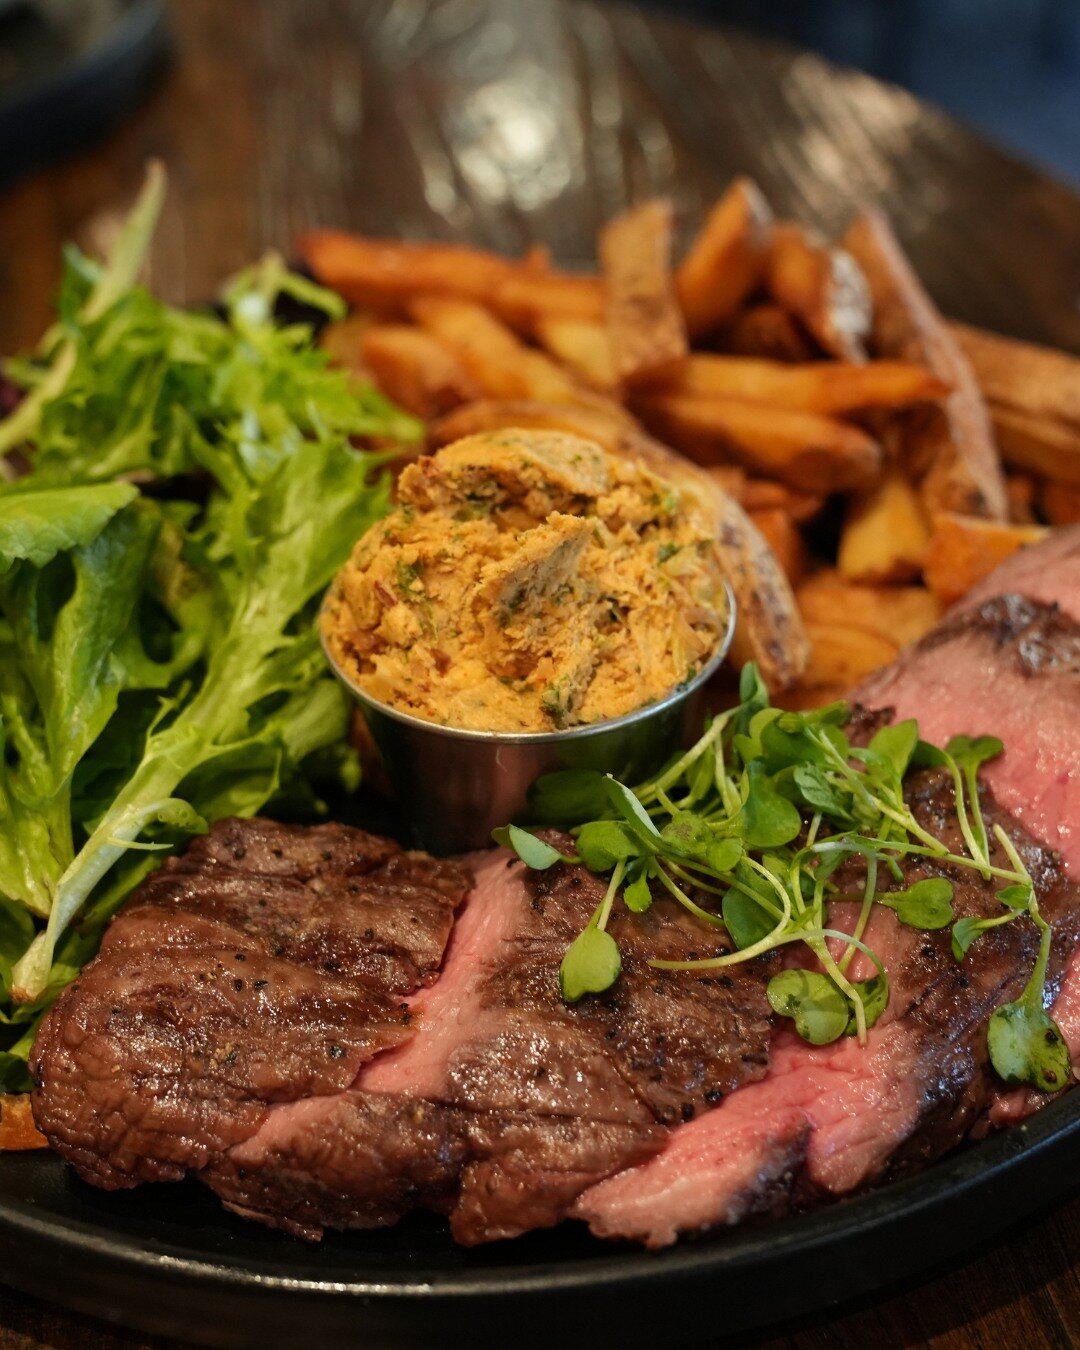 Our take on the classic dish Steak Frites is served with what we call Cowboy Butter, a special blend of herbs, spices, and secret ingredients that will have your taste buds two-stepping all night 🤠 

#cowboybutter #secretingredients #steakfrites #bi